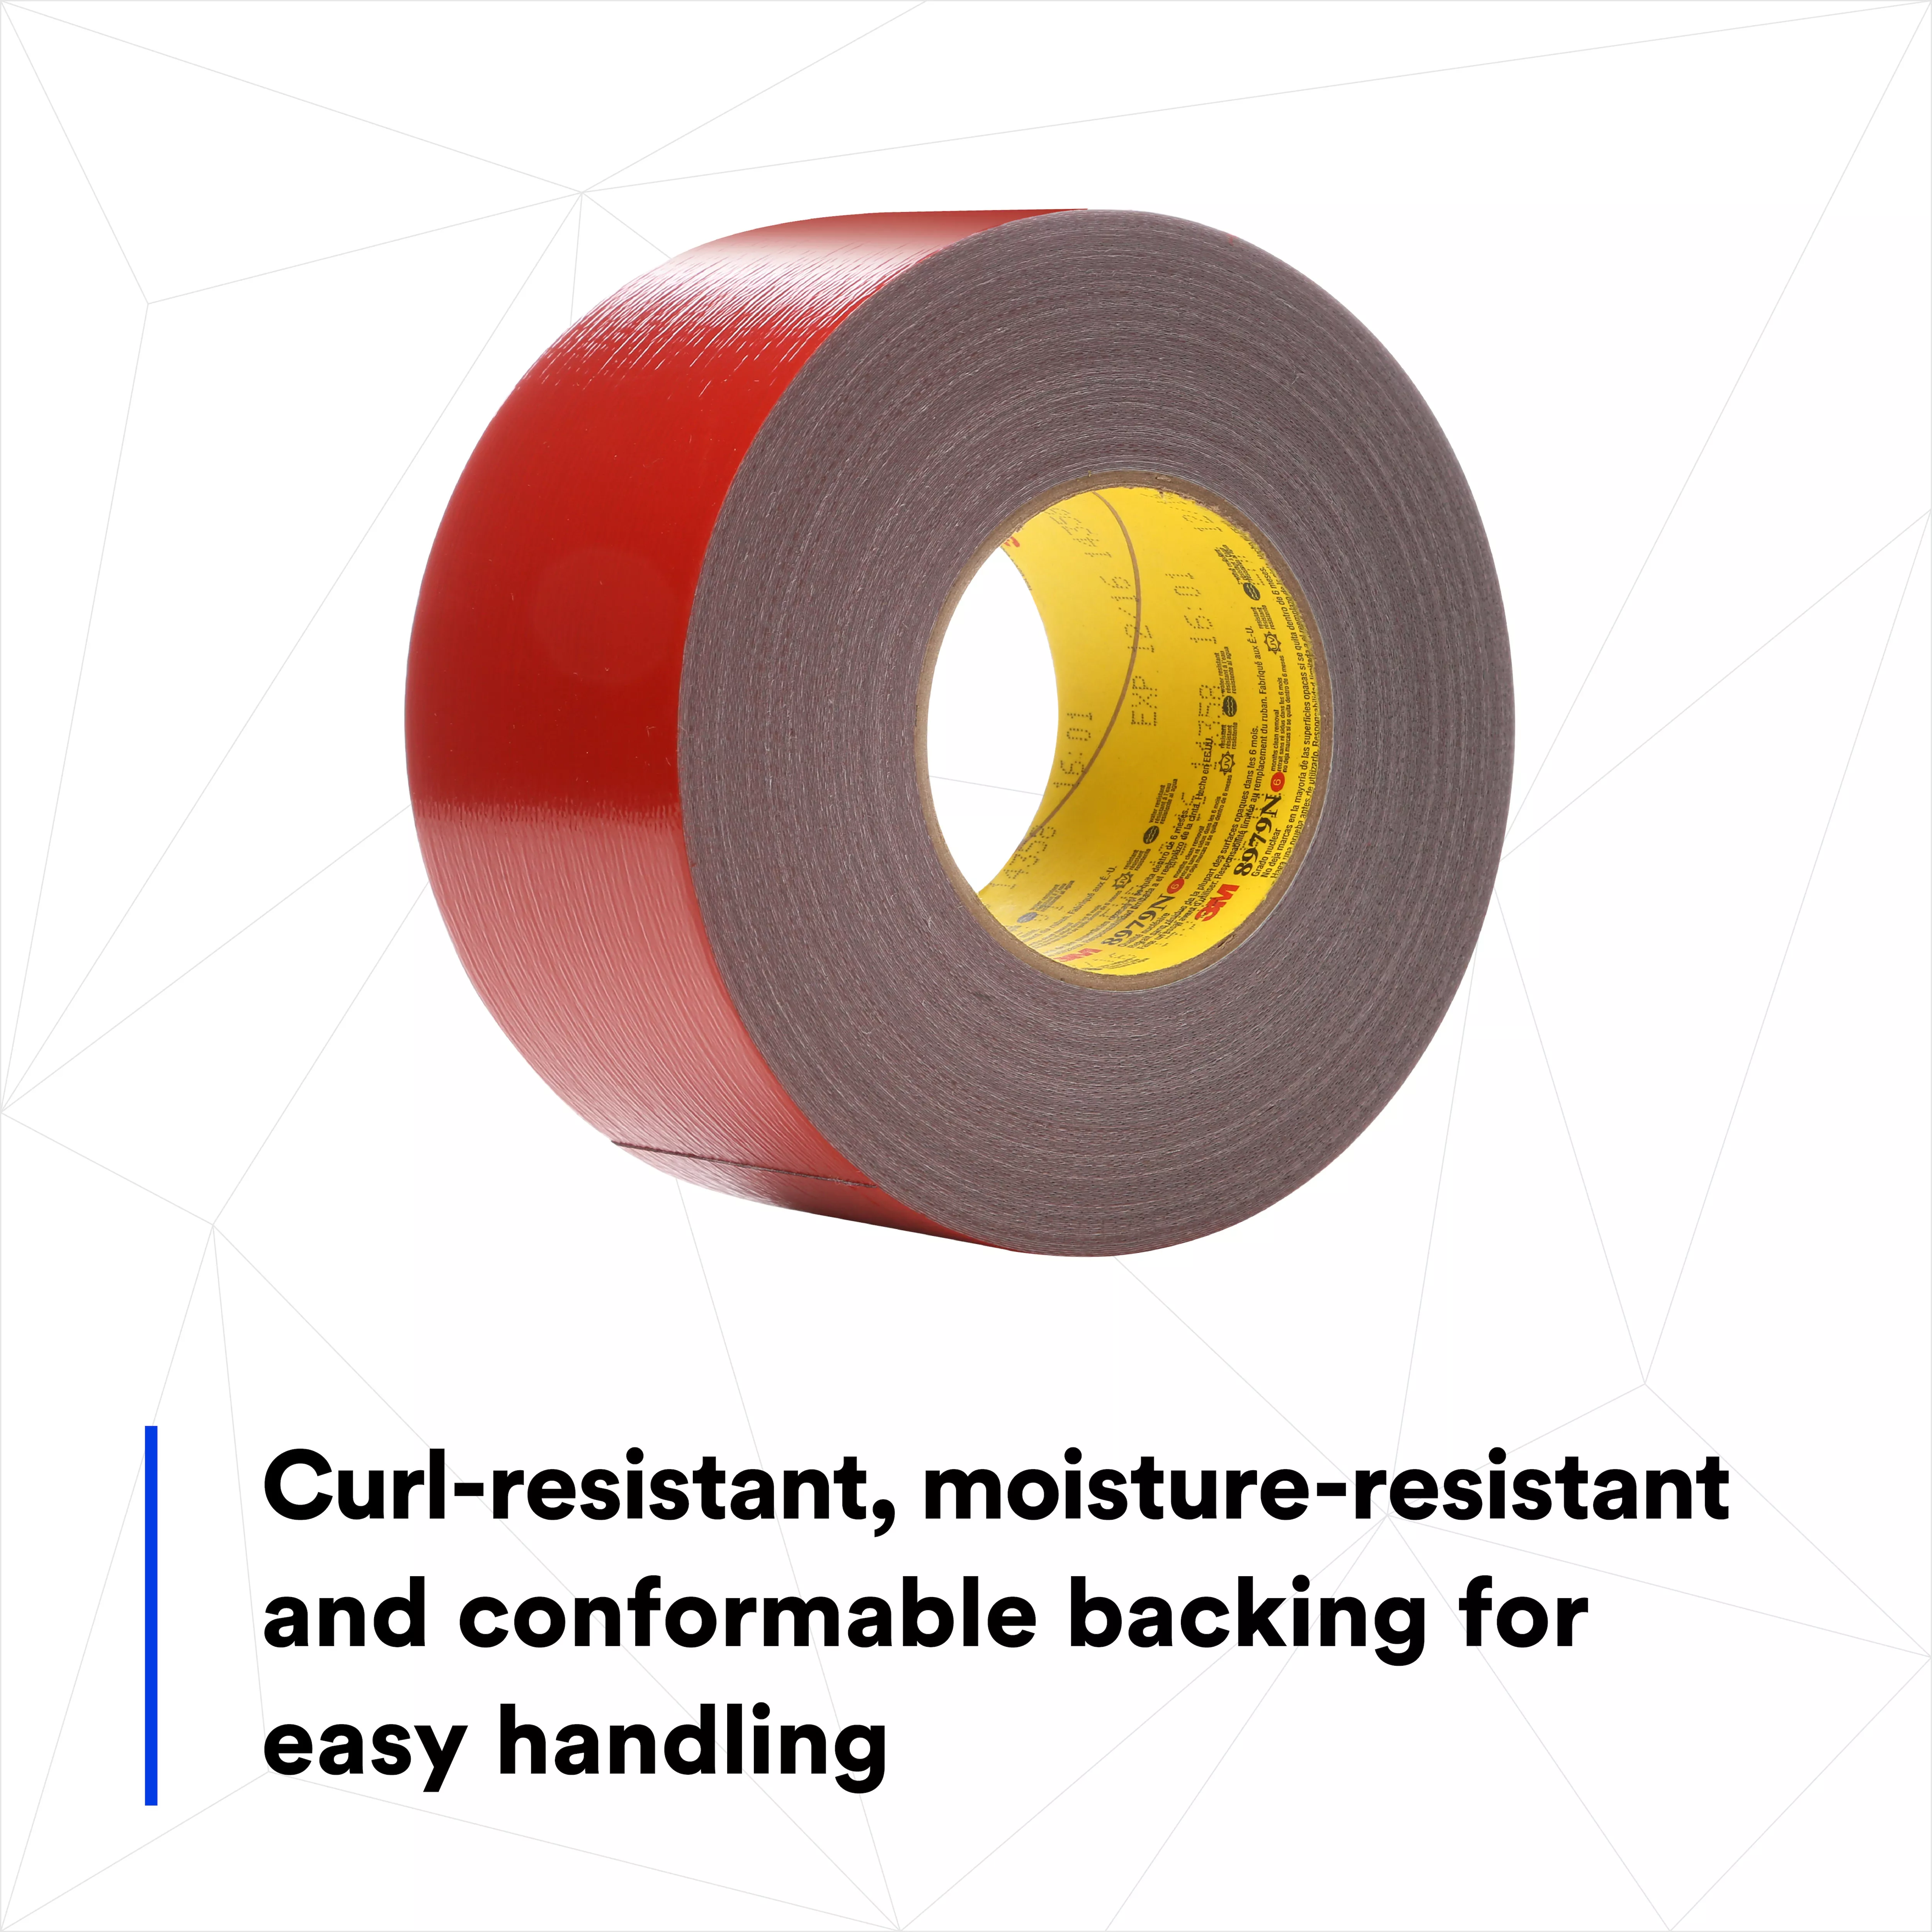 Product Number 8979N | 3M™ Performance Plus Duct Tape 8979N